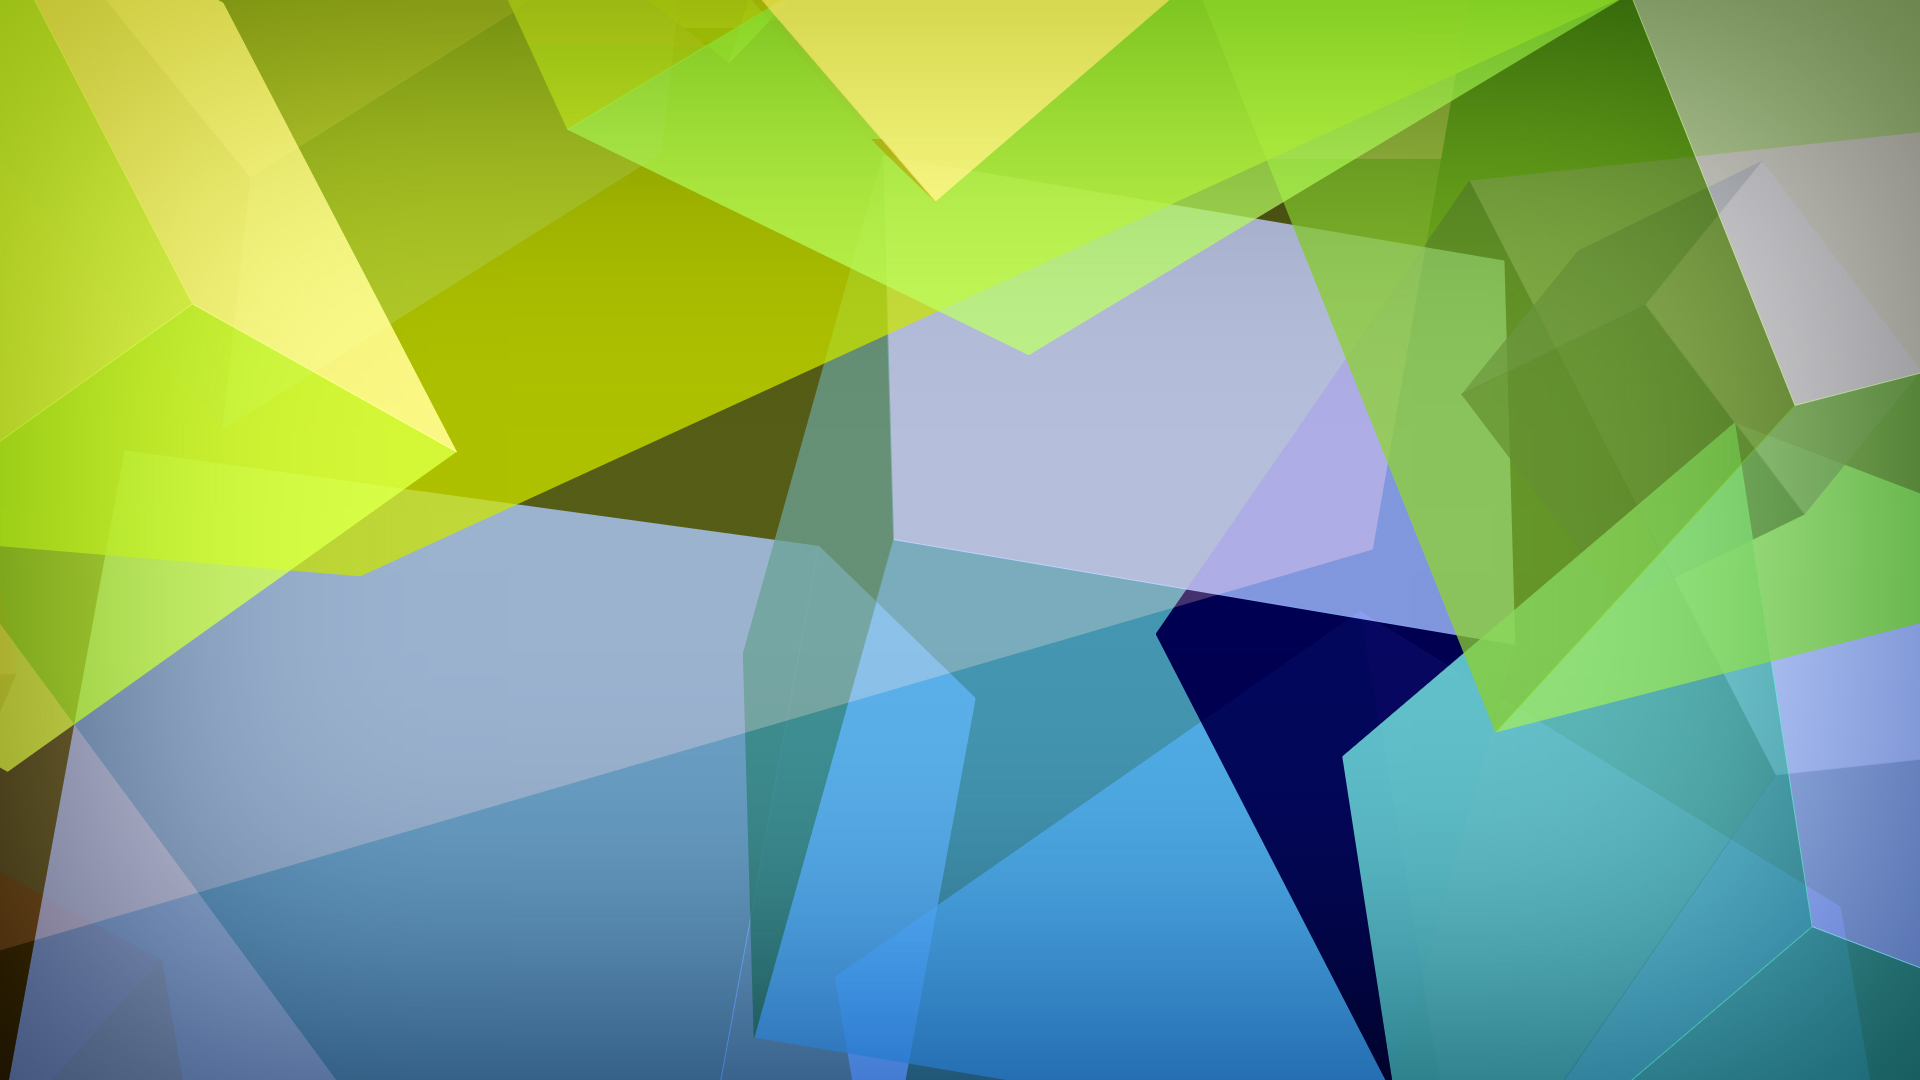  Abstract Geometric Colored Shapes desktop PC and Mac wallpaper